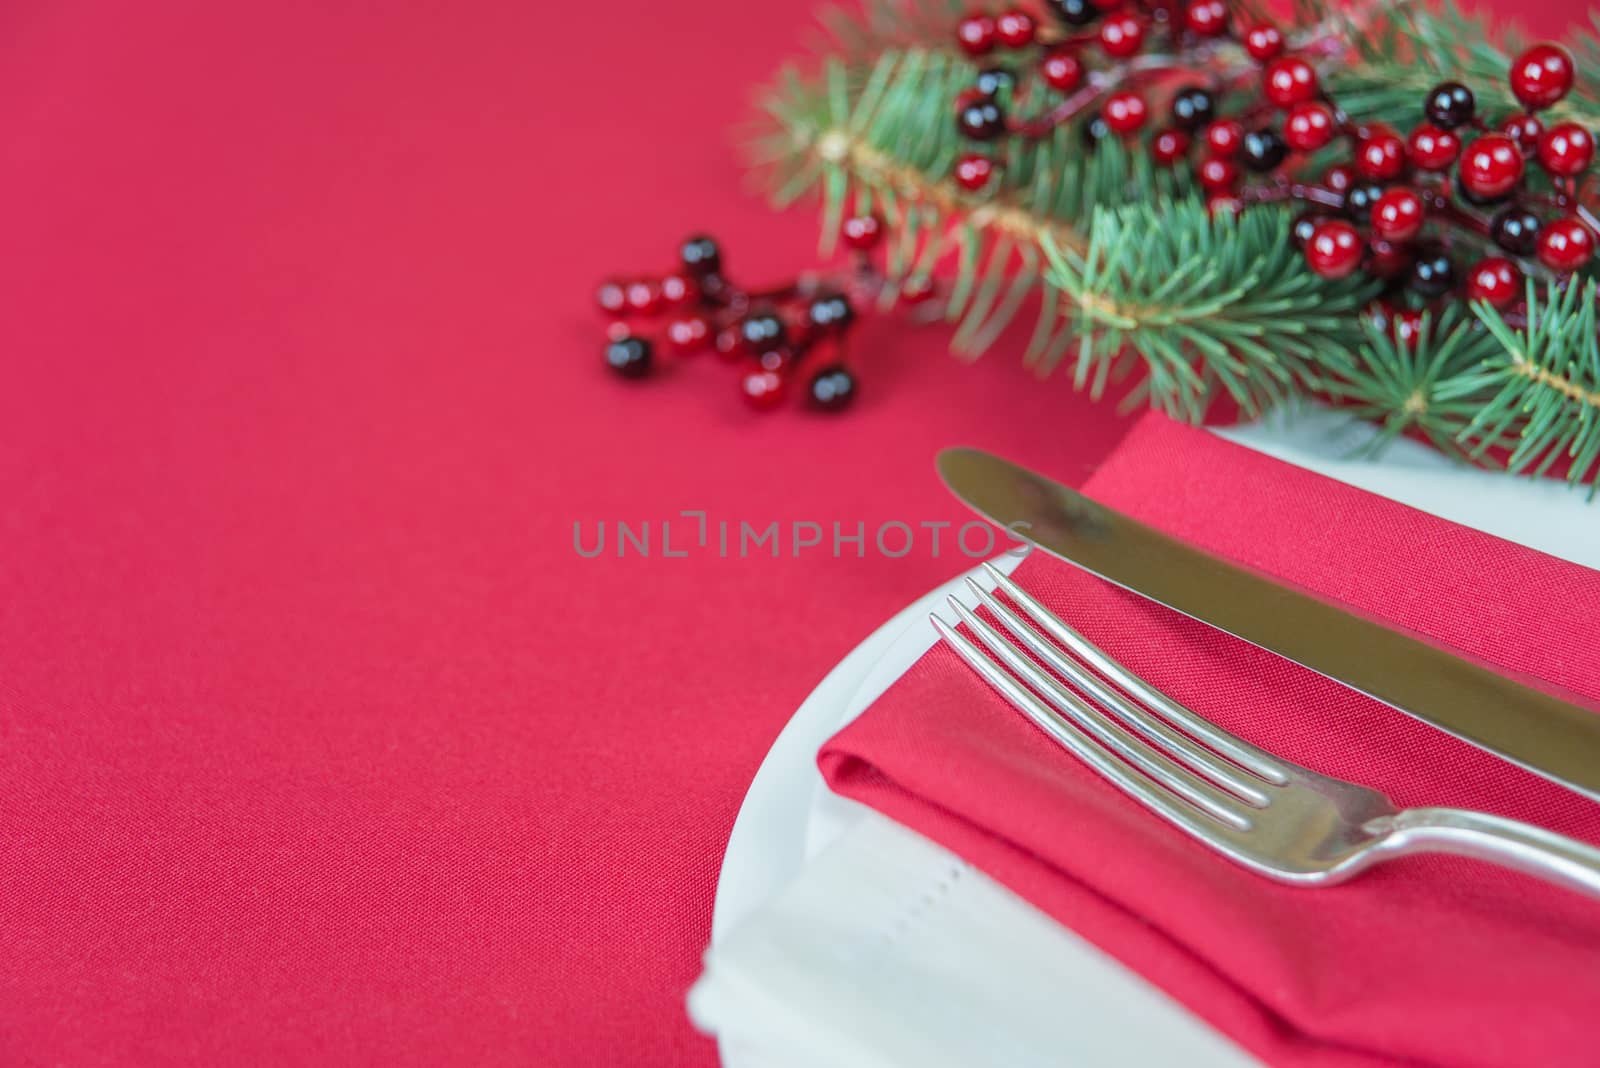 Silver knife and fork lie on the red linen napkin, as well as red holly berries and green spruce branch, which is located on a table covered with a red tablecloth, with space for text